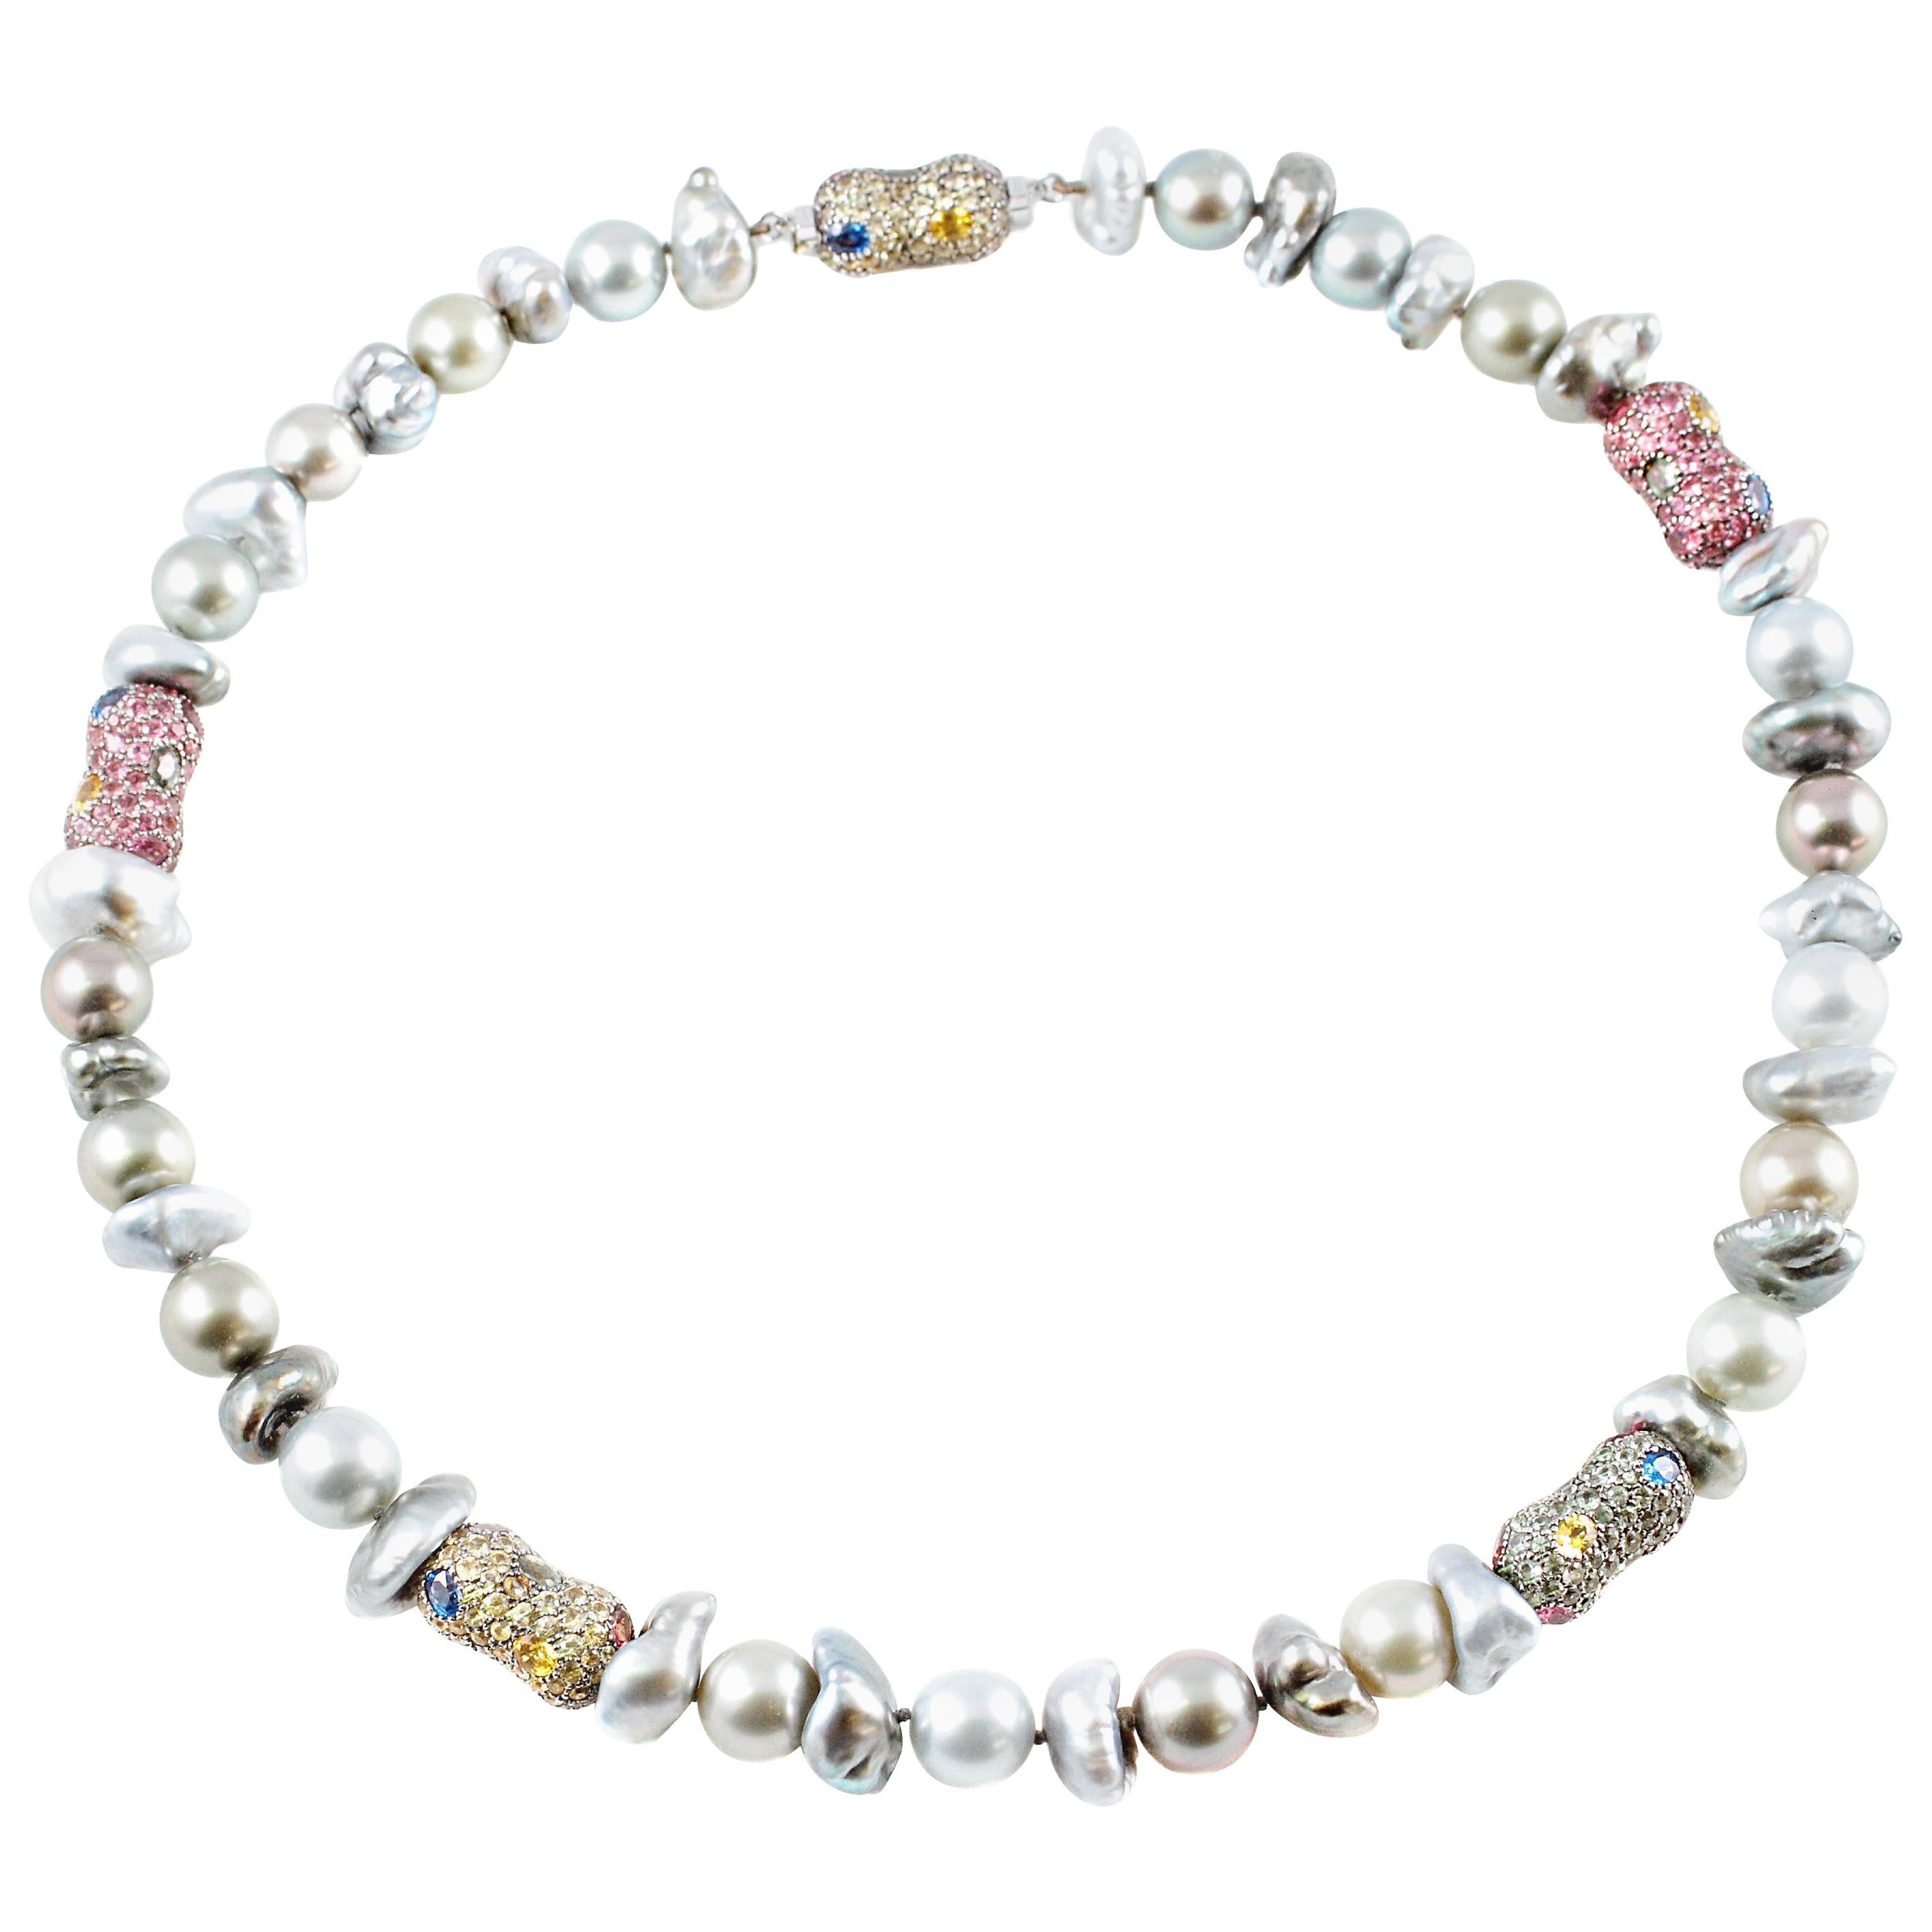 Margot McKinney "Tribal Chic Collection" Necklace Pearls Sapphires Tourmalines